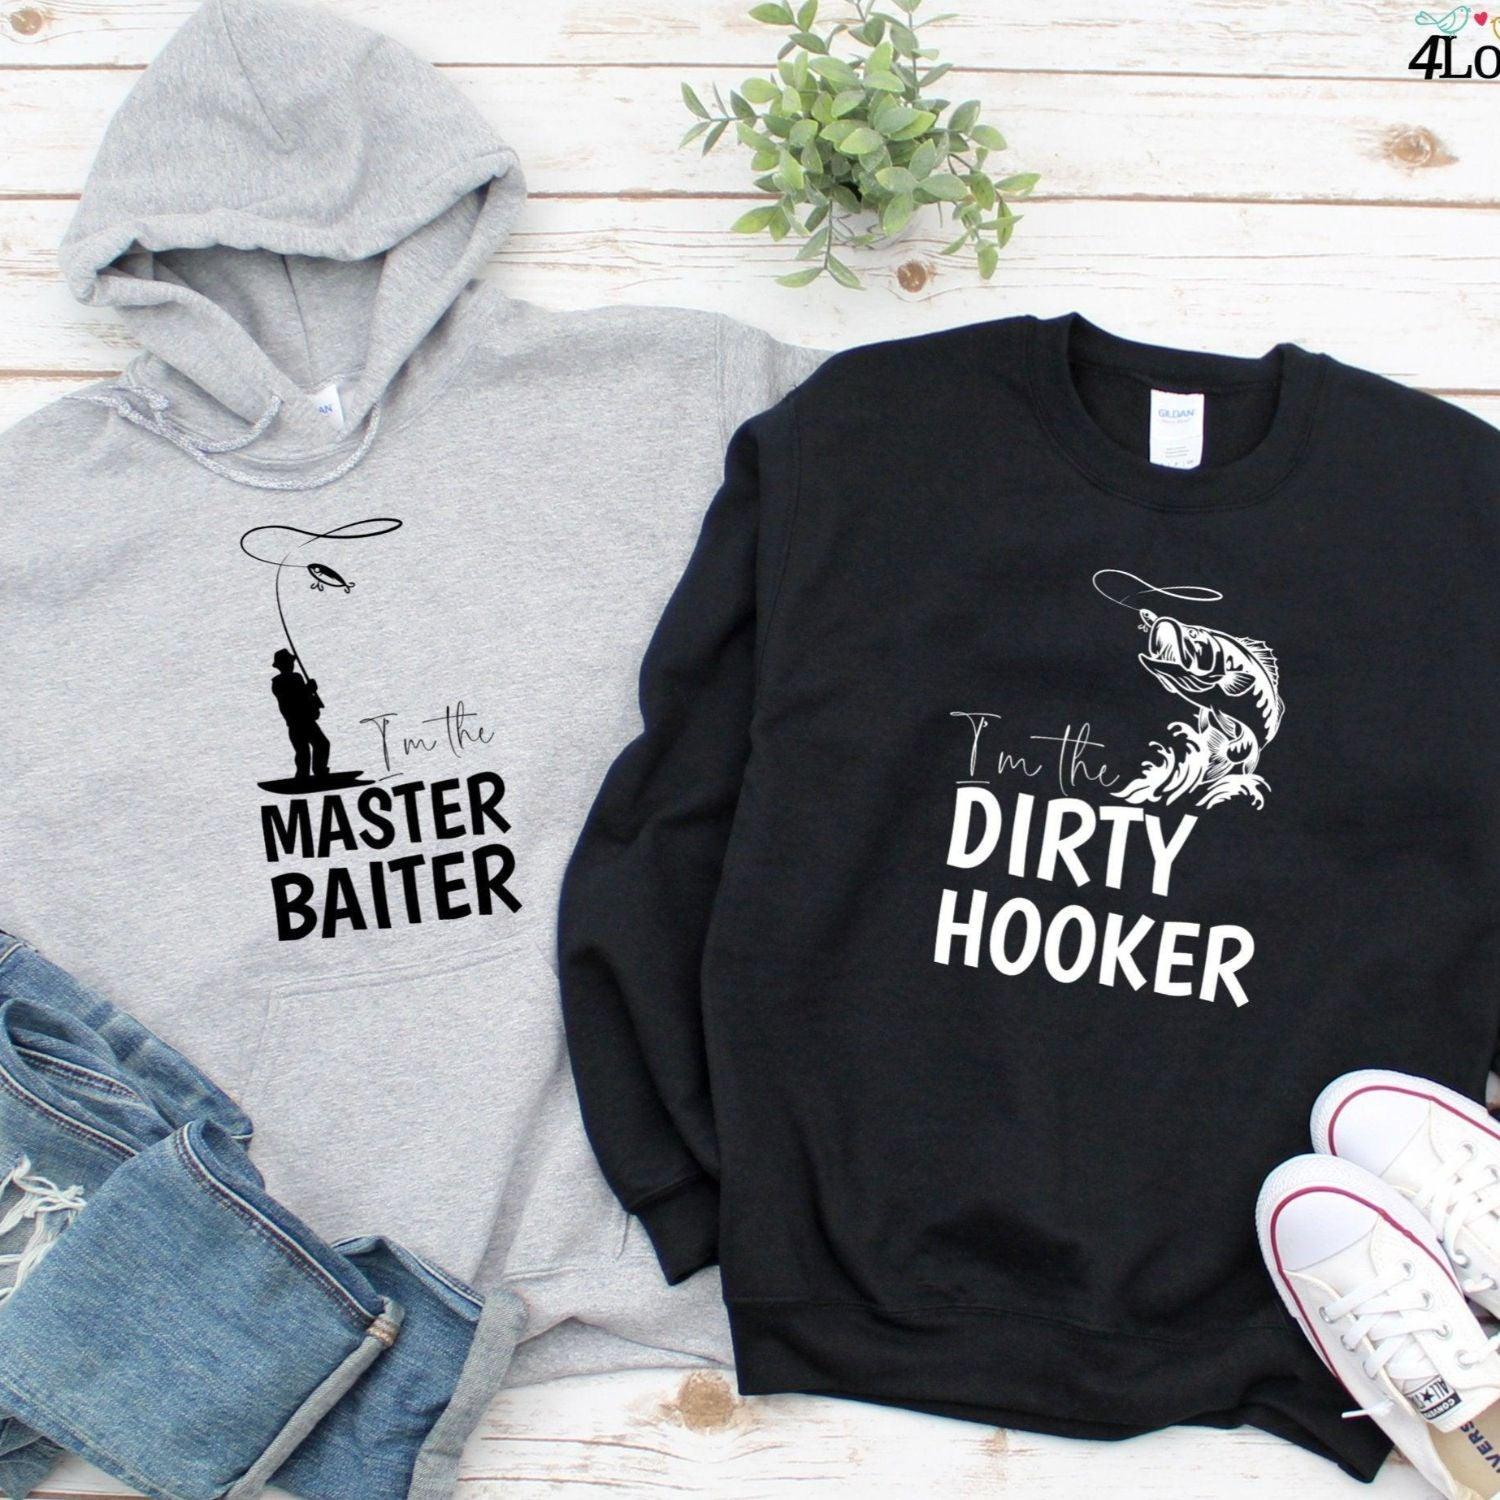 Matching Set: Master Baiter & Dirty Hooker Outfits - Fun Comfy Duo